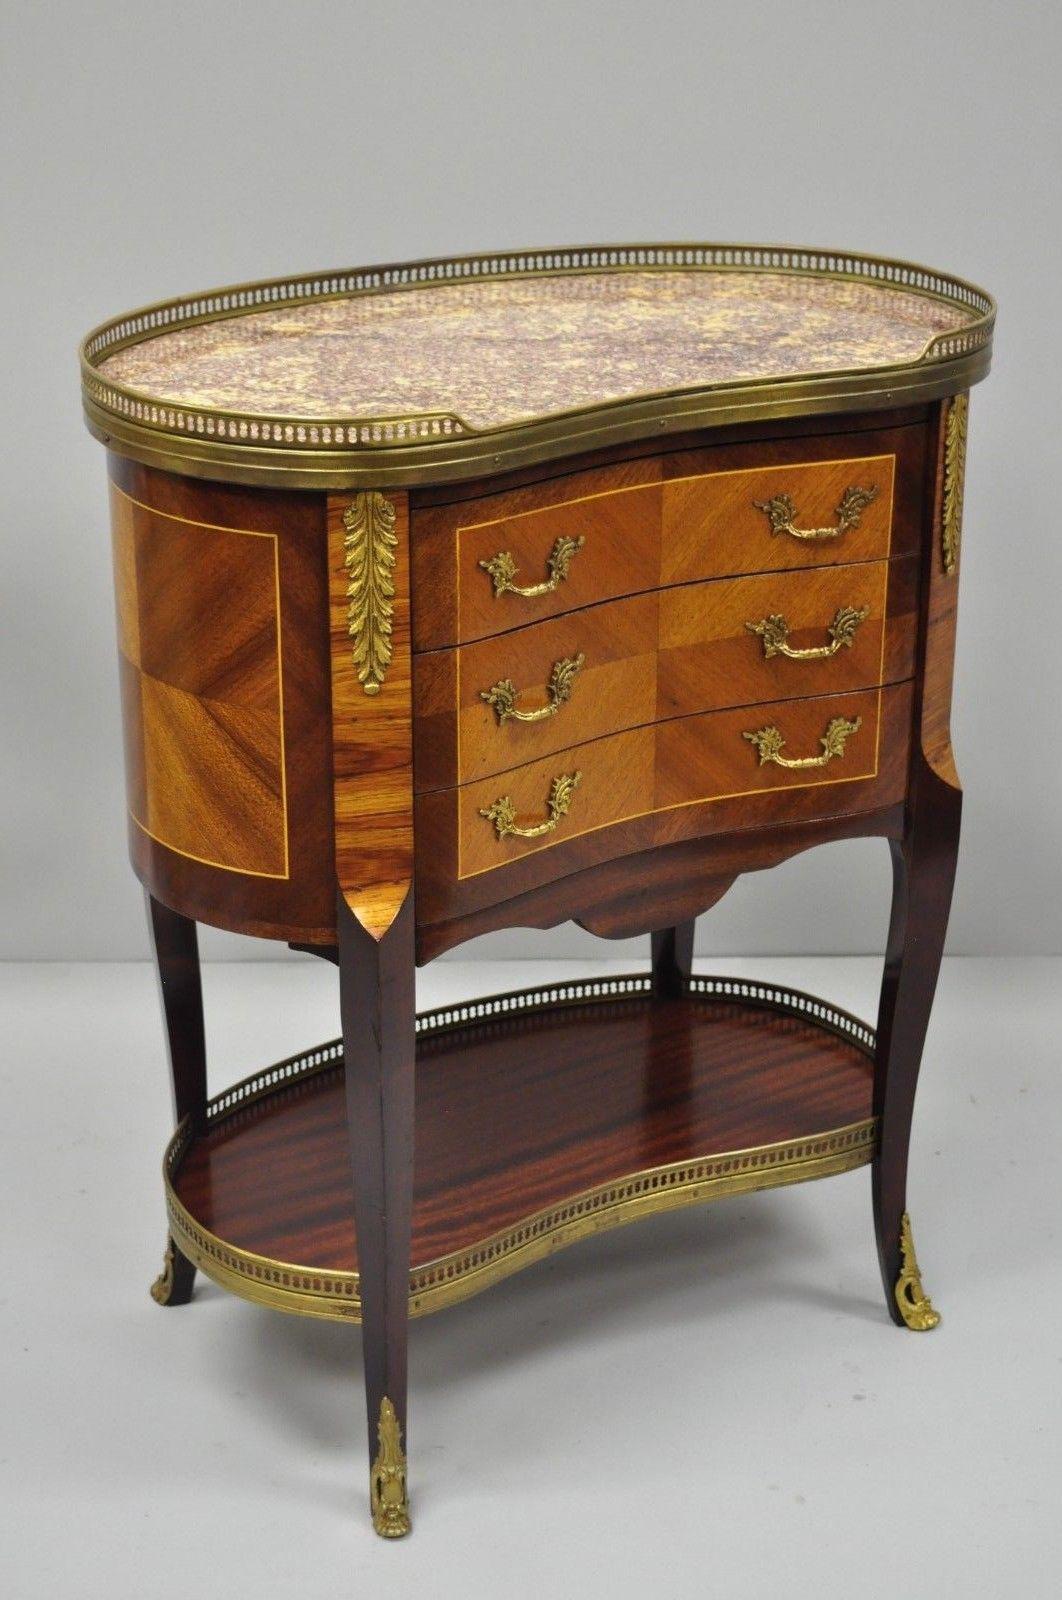 Louis XV French style kidney shaped marble-top nightstand end table. Item features inset pink marble top, kidney shaped, brass accents, 3 drawers, cabriole legs, nice inlay, great style and form, circa late 20th century. Measurements: 28.5